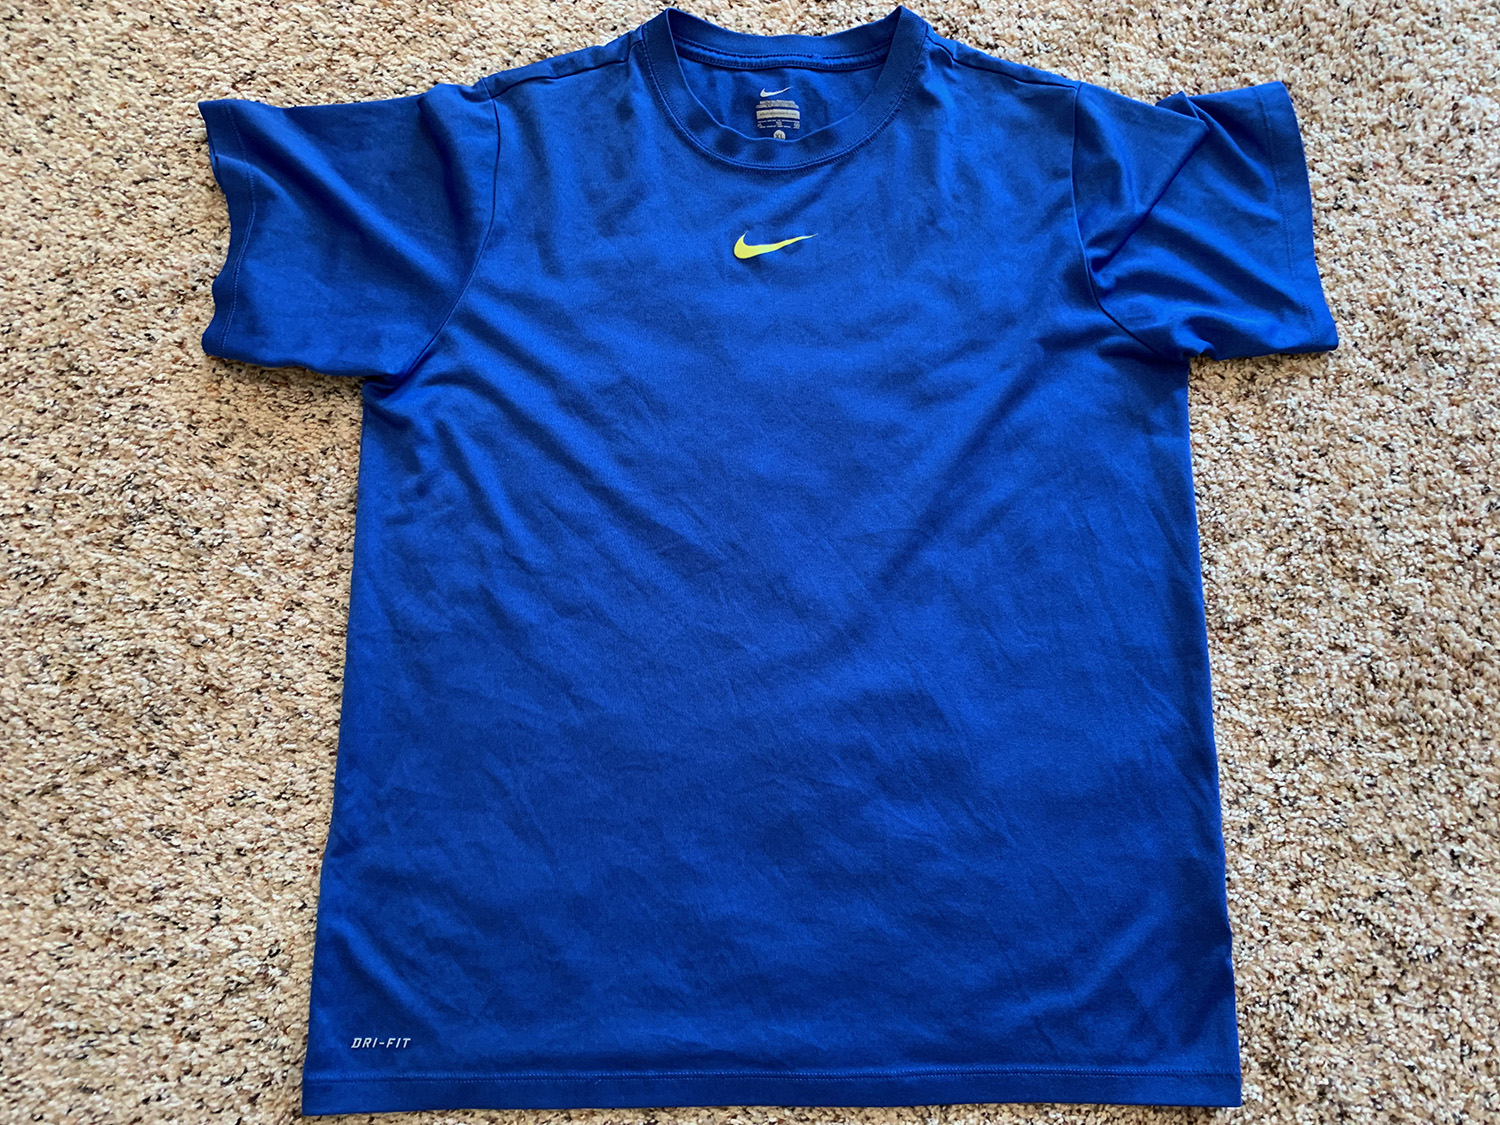 Nike Youth Dri-Fit Blue Polyester T-Shirt Size XL